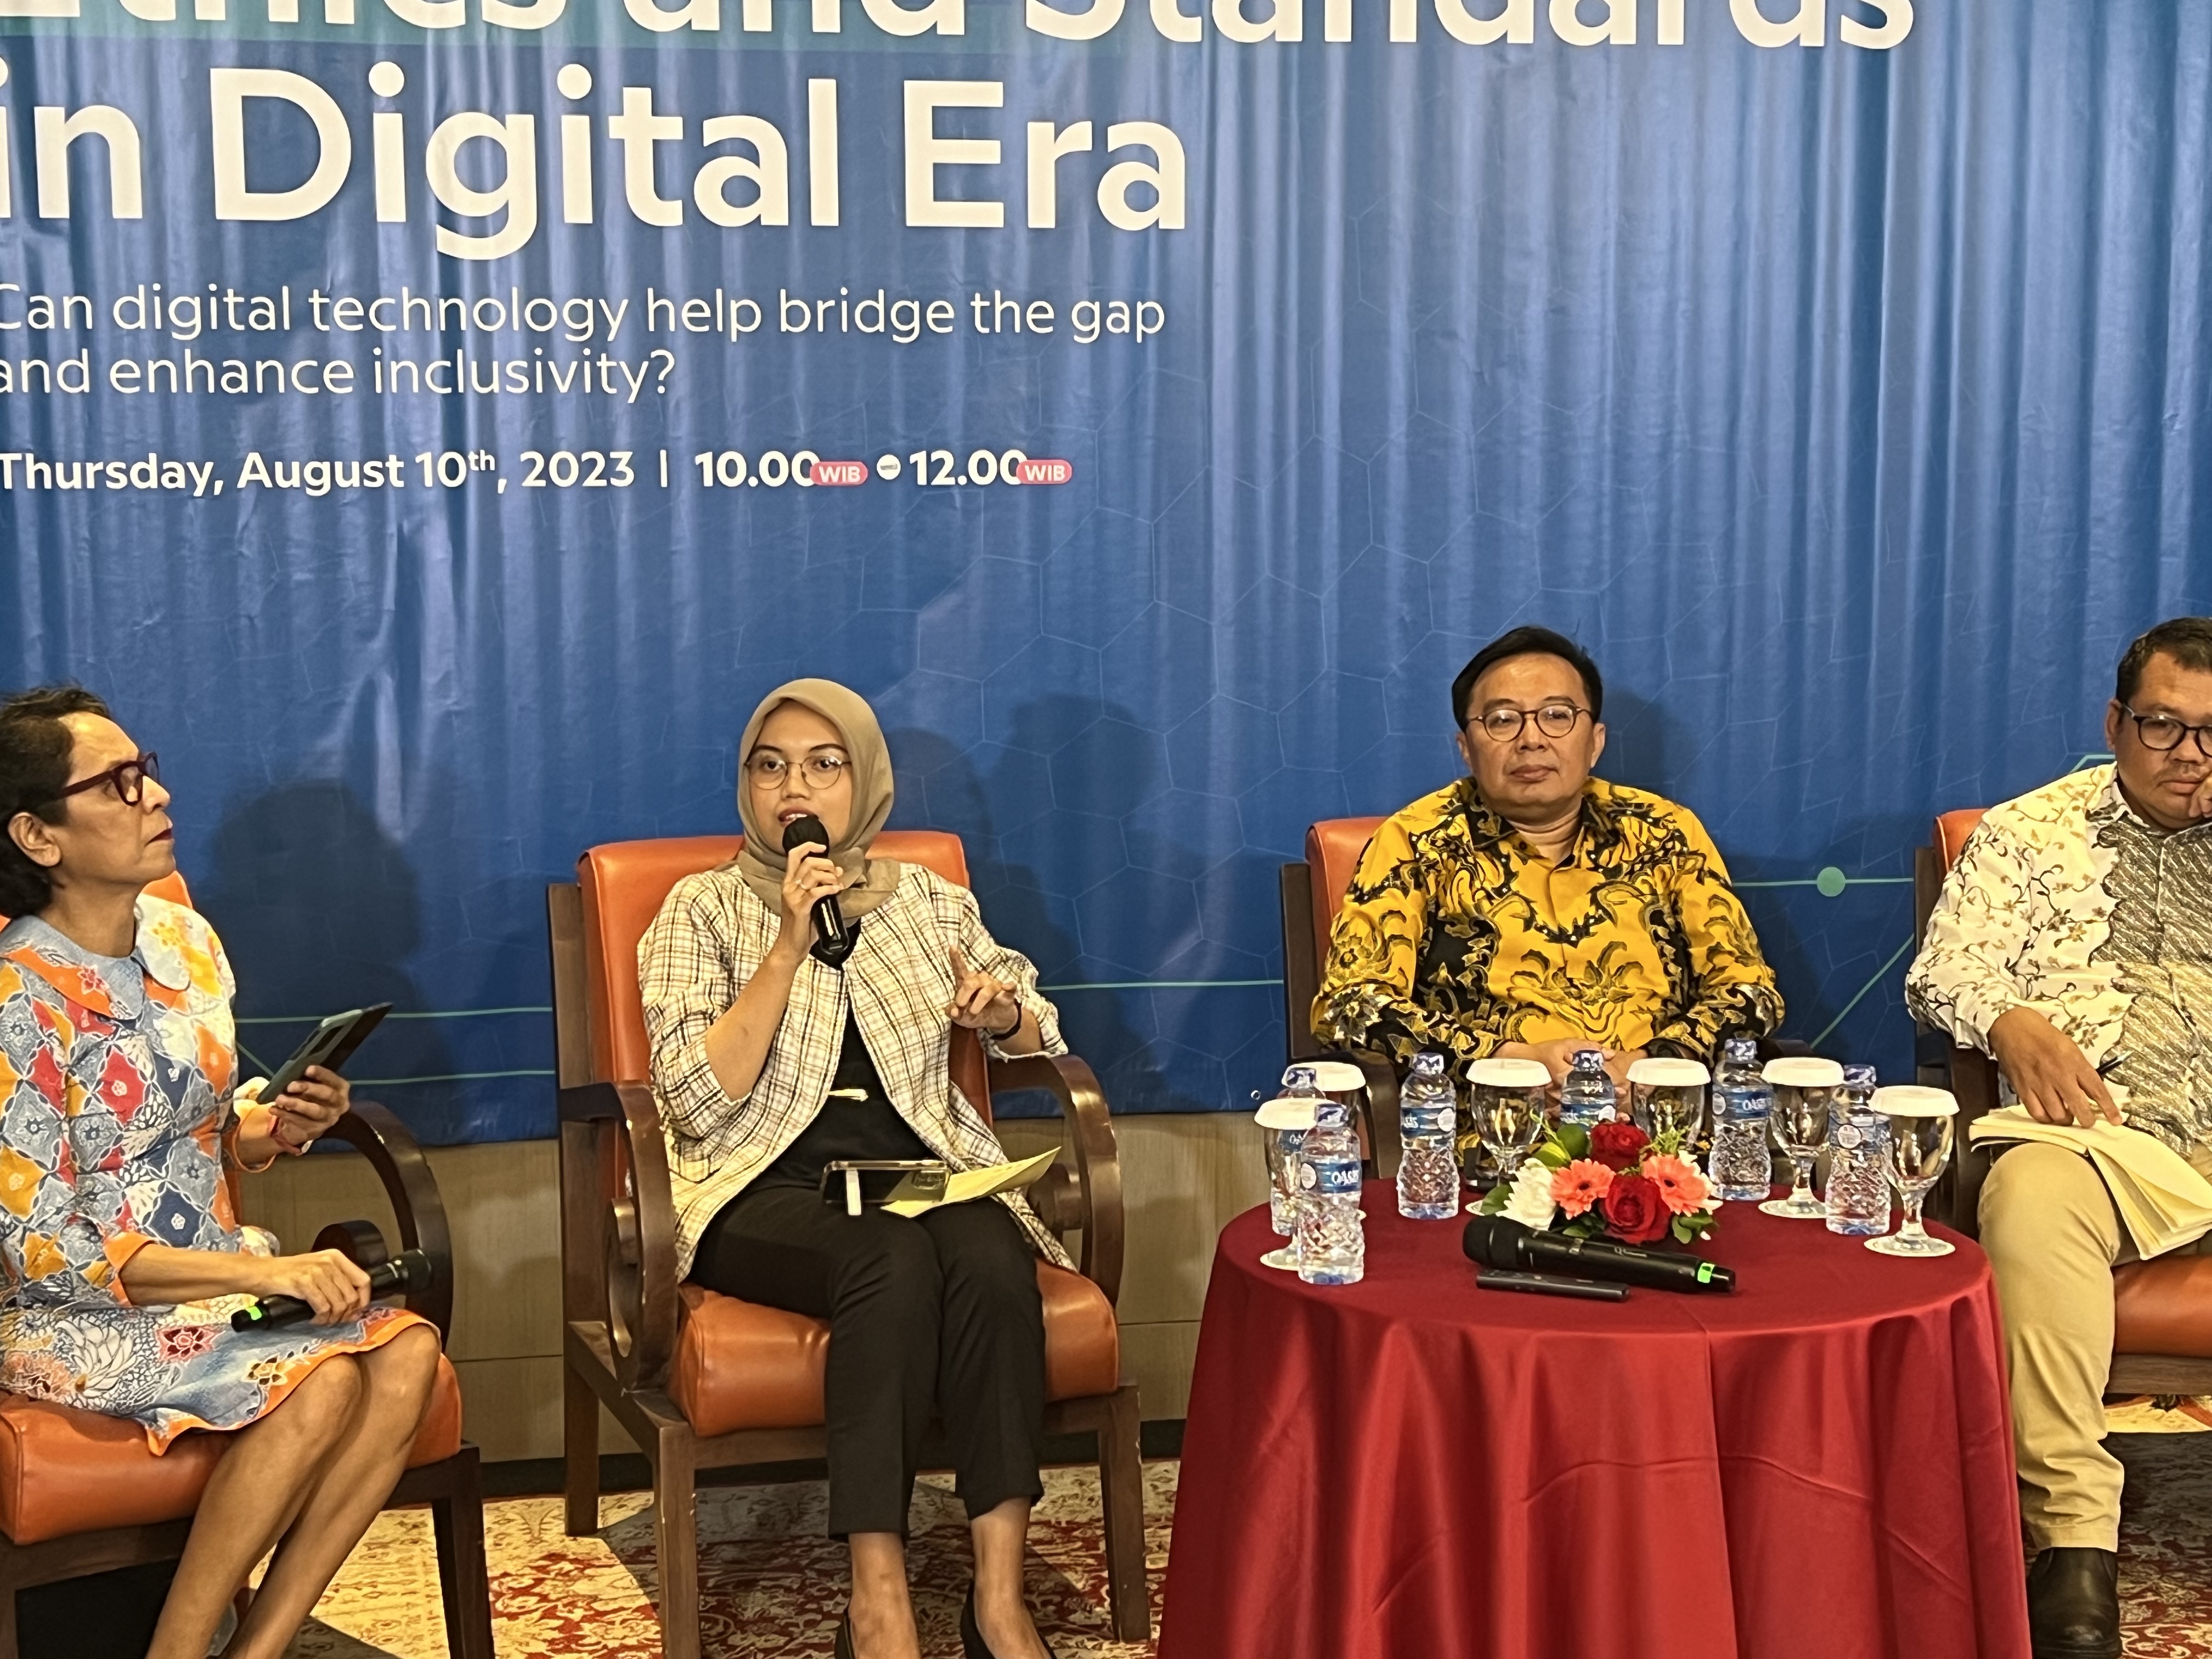 Ms. Nindhitya Nurmalitasari, Analyst of Personal Data Protection Cooperation at the Ministry of Communications and Informatics